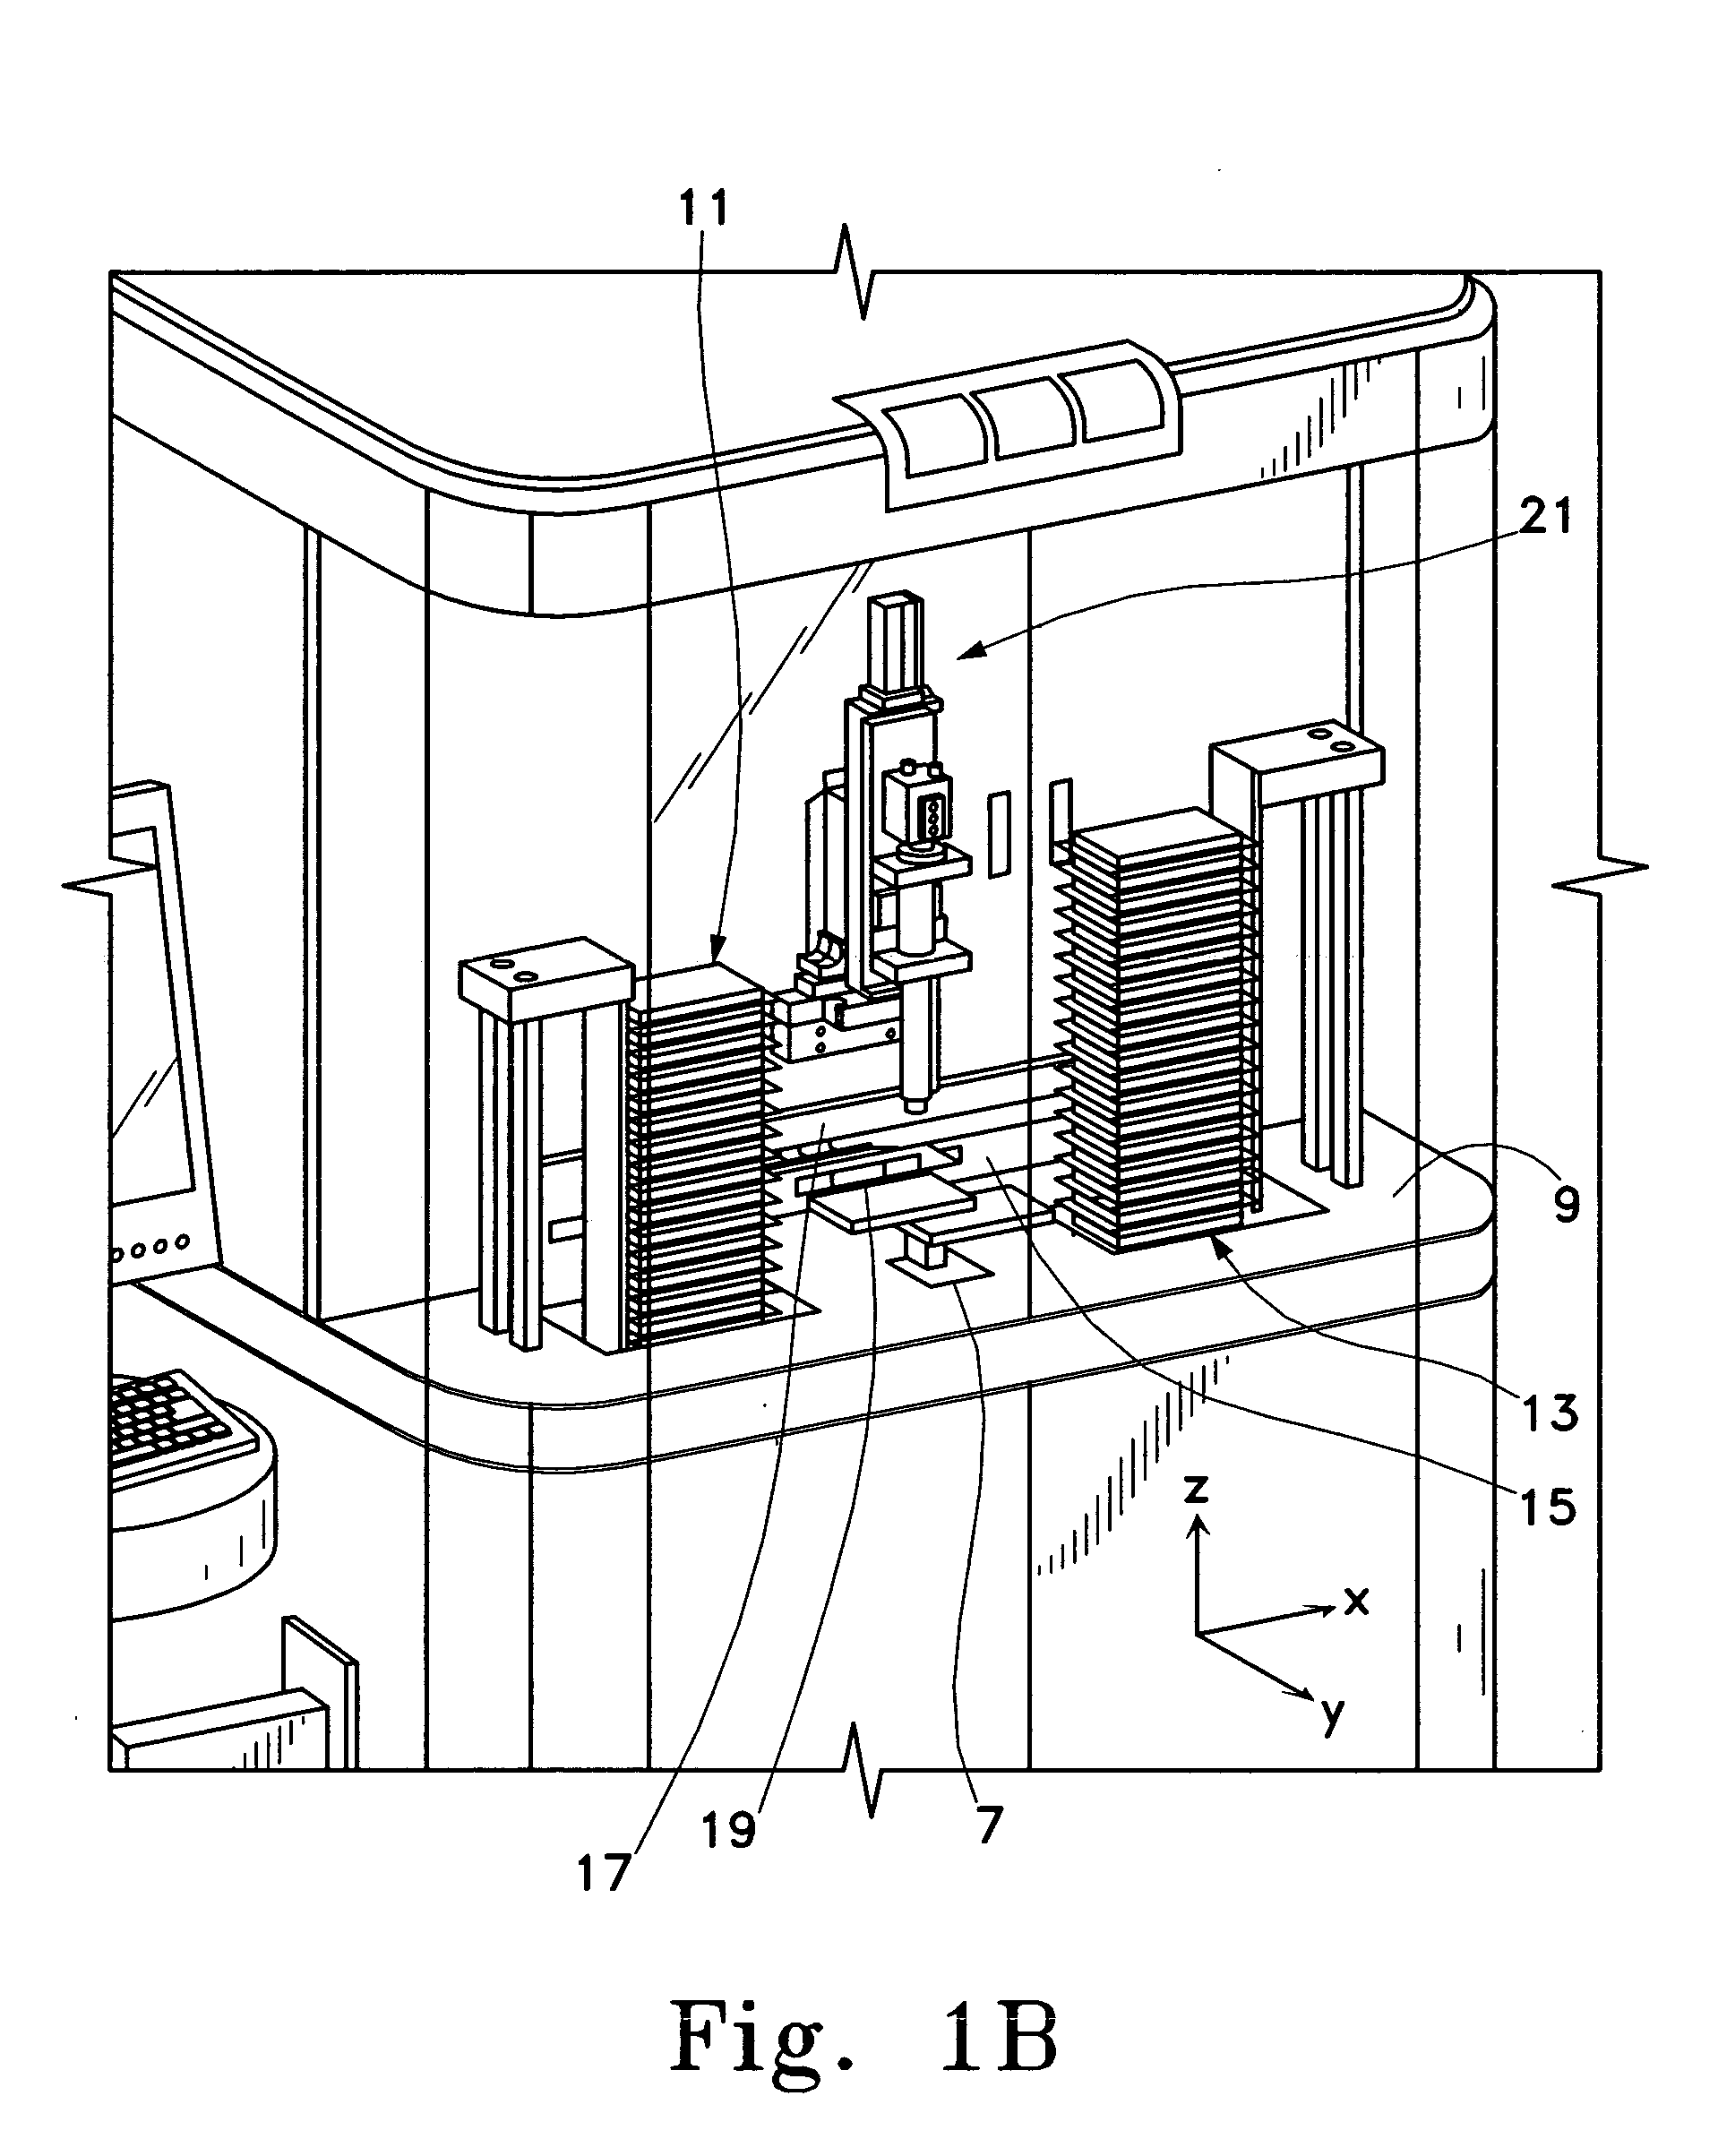 Source and target management system for high throughput transfer of liquids